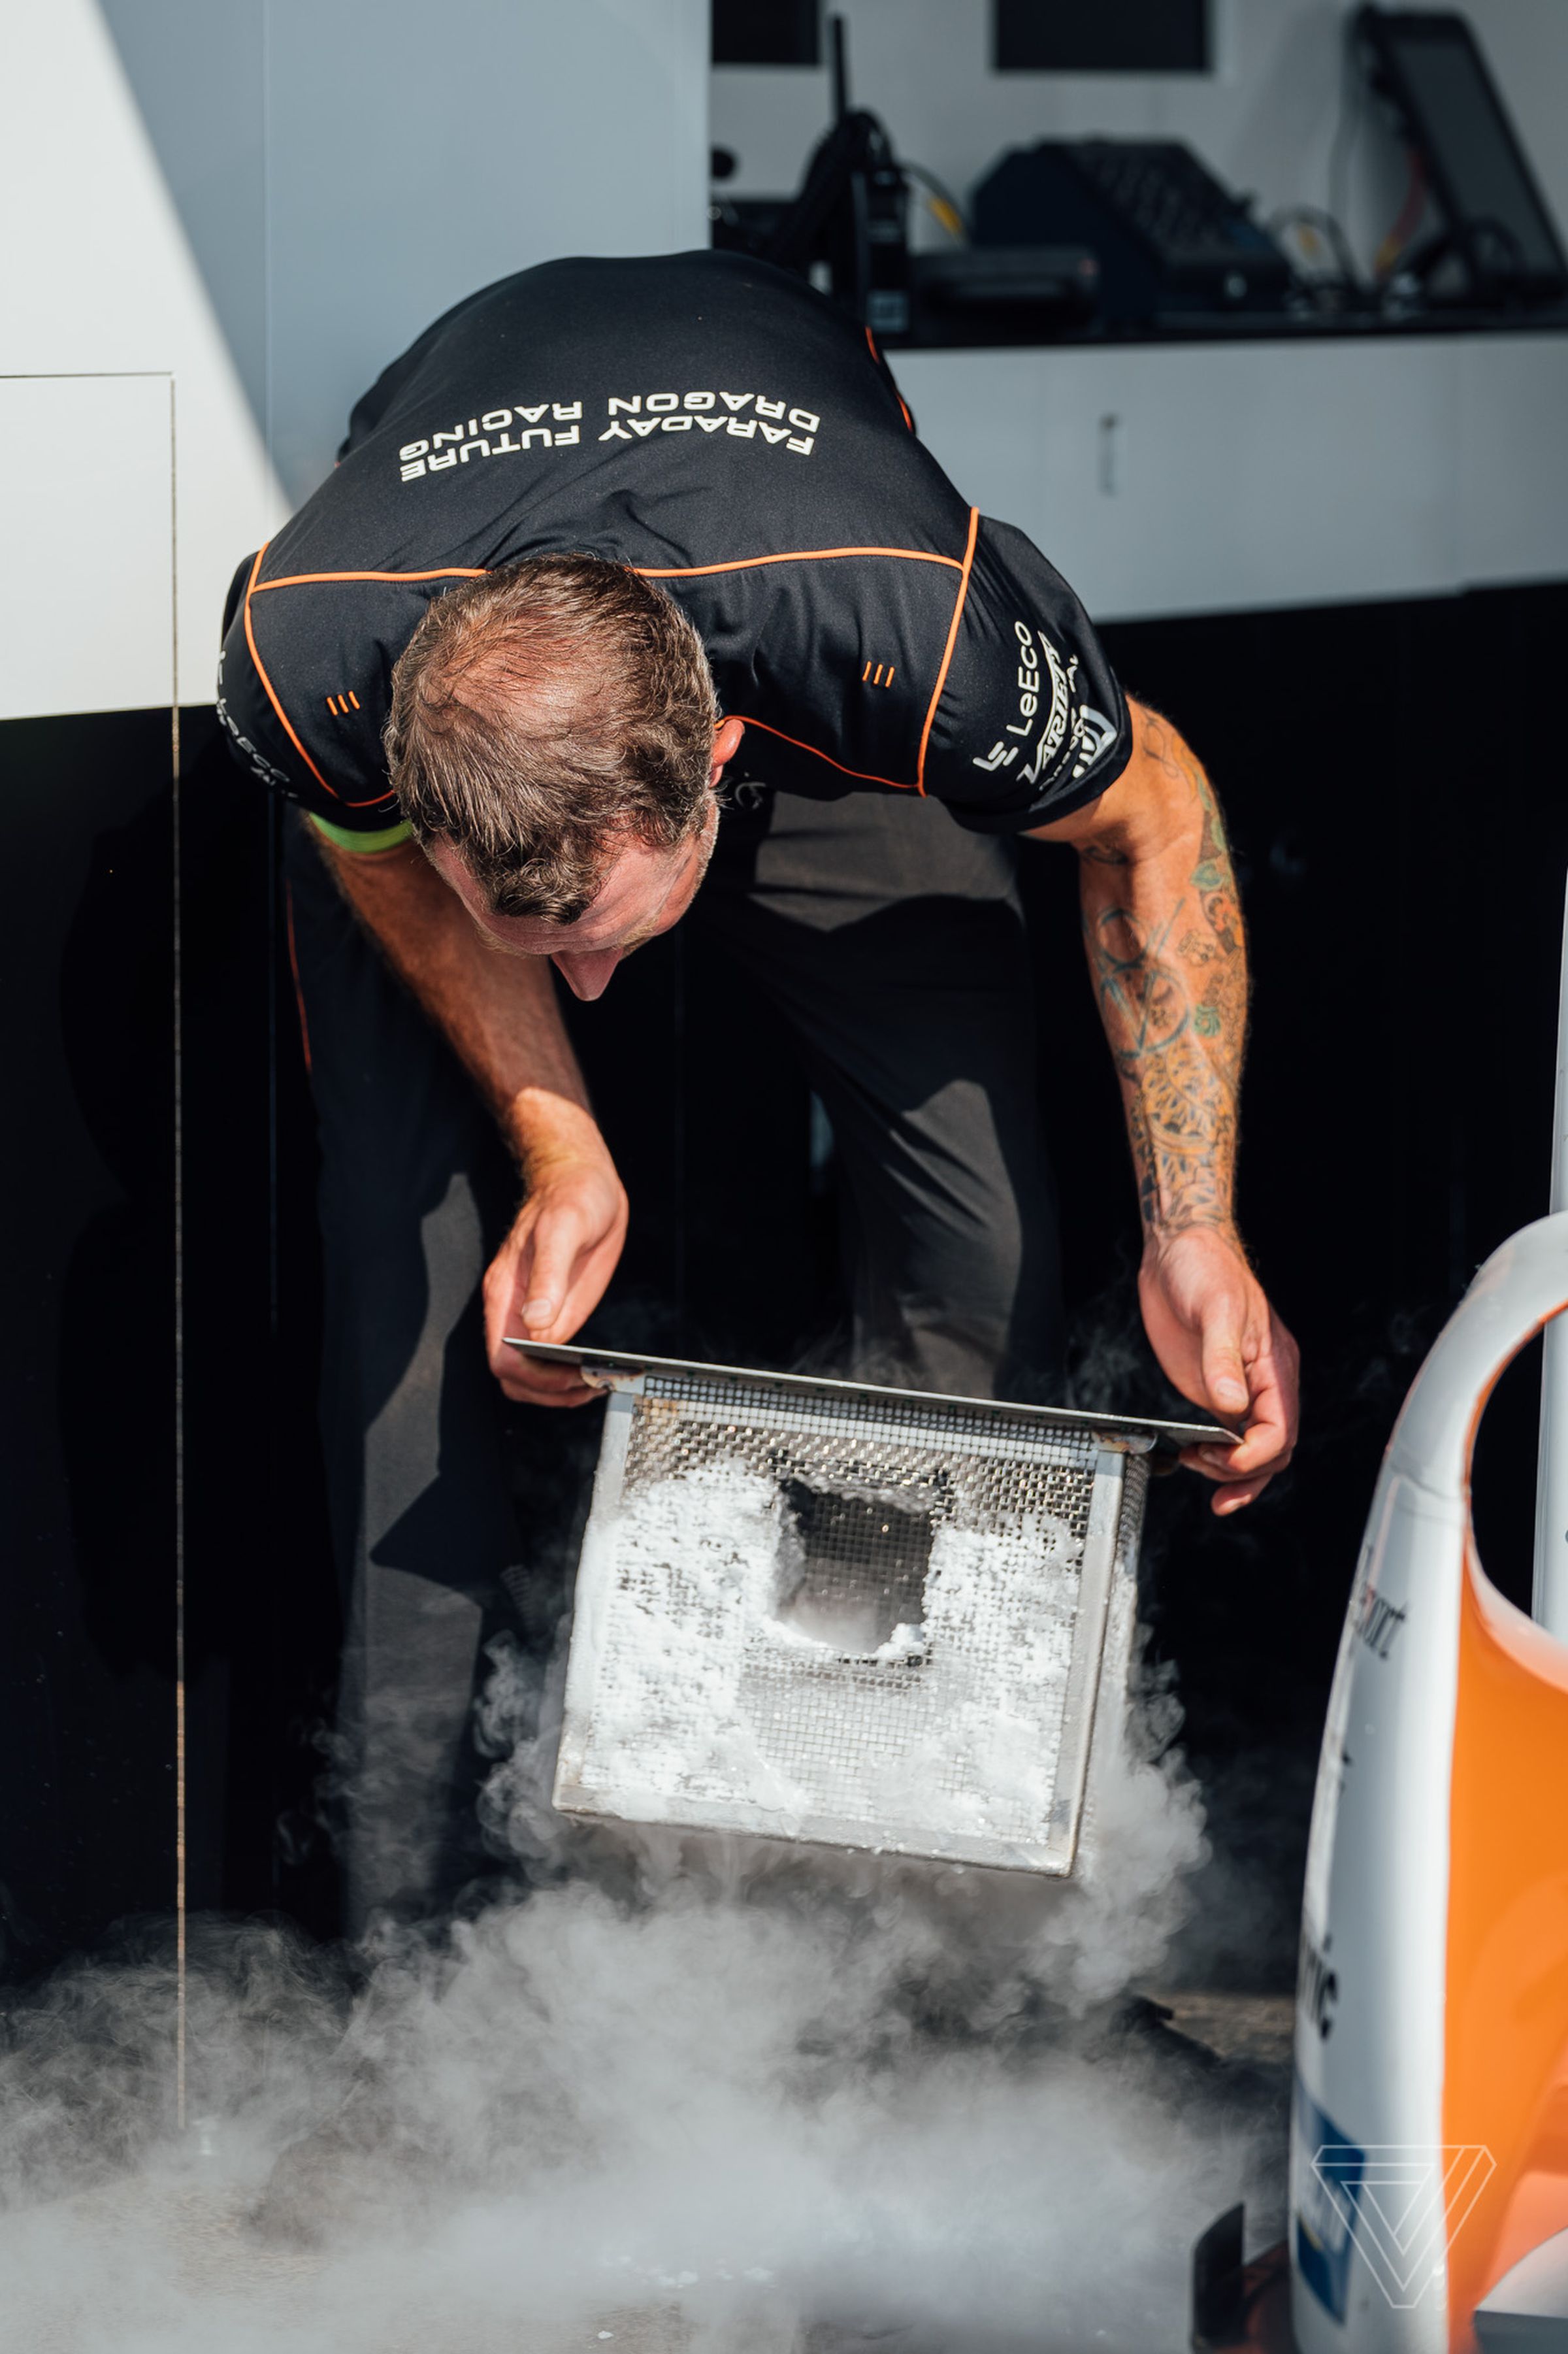 Another person from the Faraday Future Dragon Racing crew changes out the dry ice being used to keep the car’s battery cool.